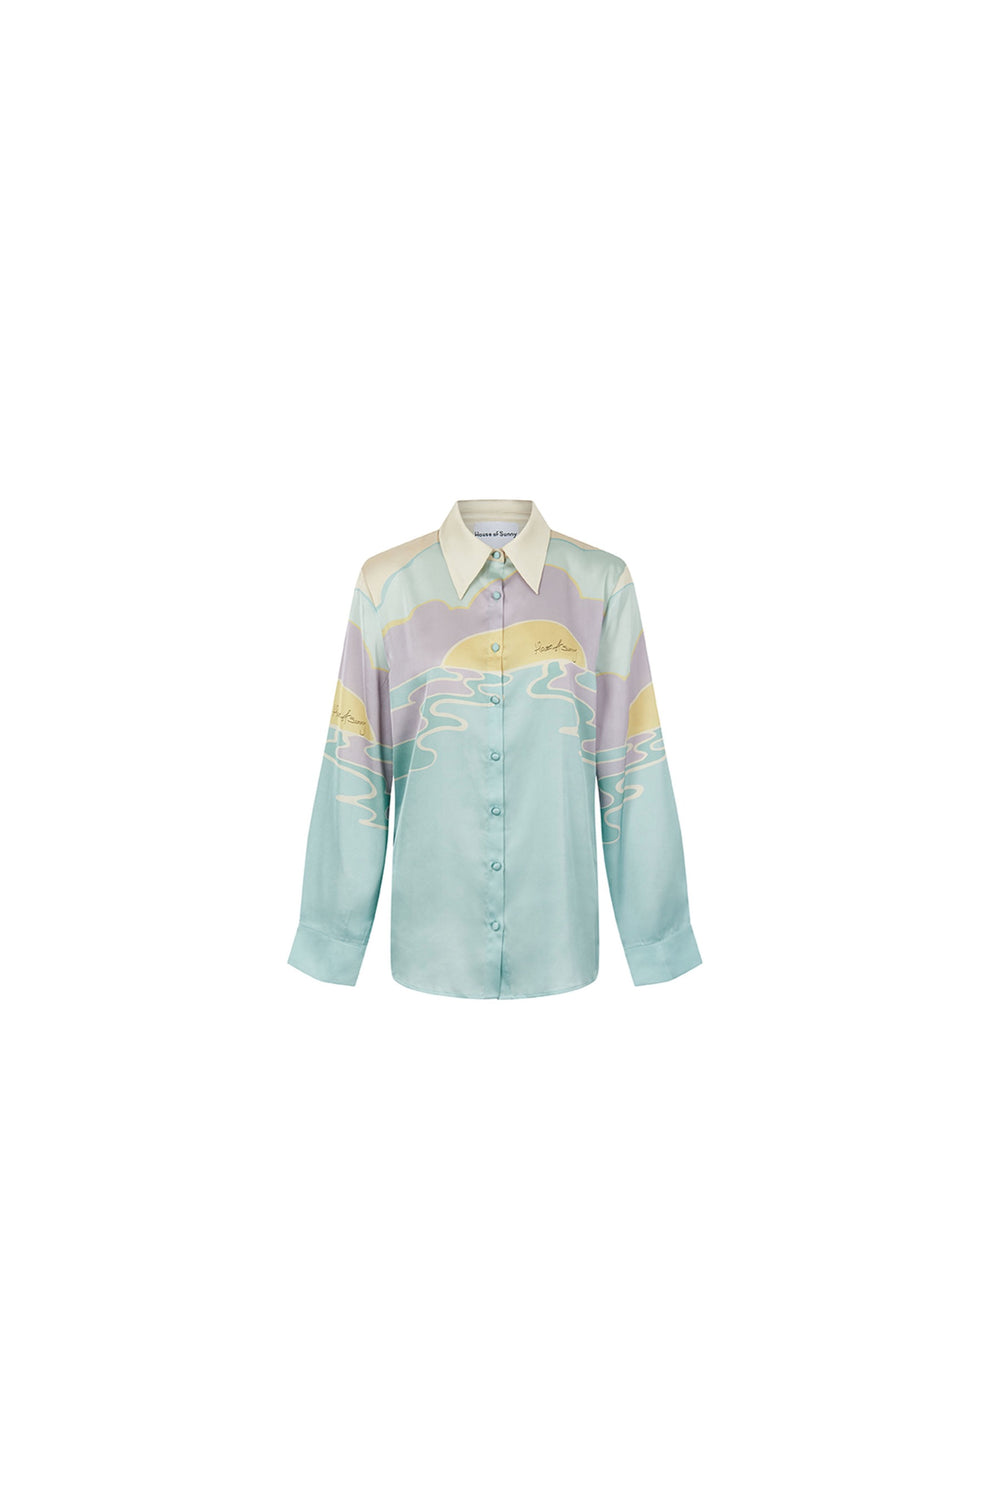 Orchid Day Tripper Shirt